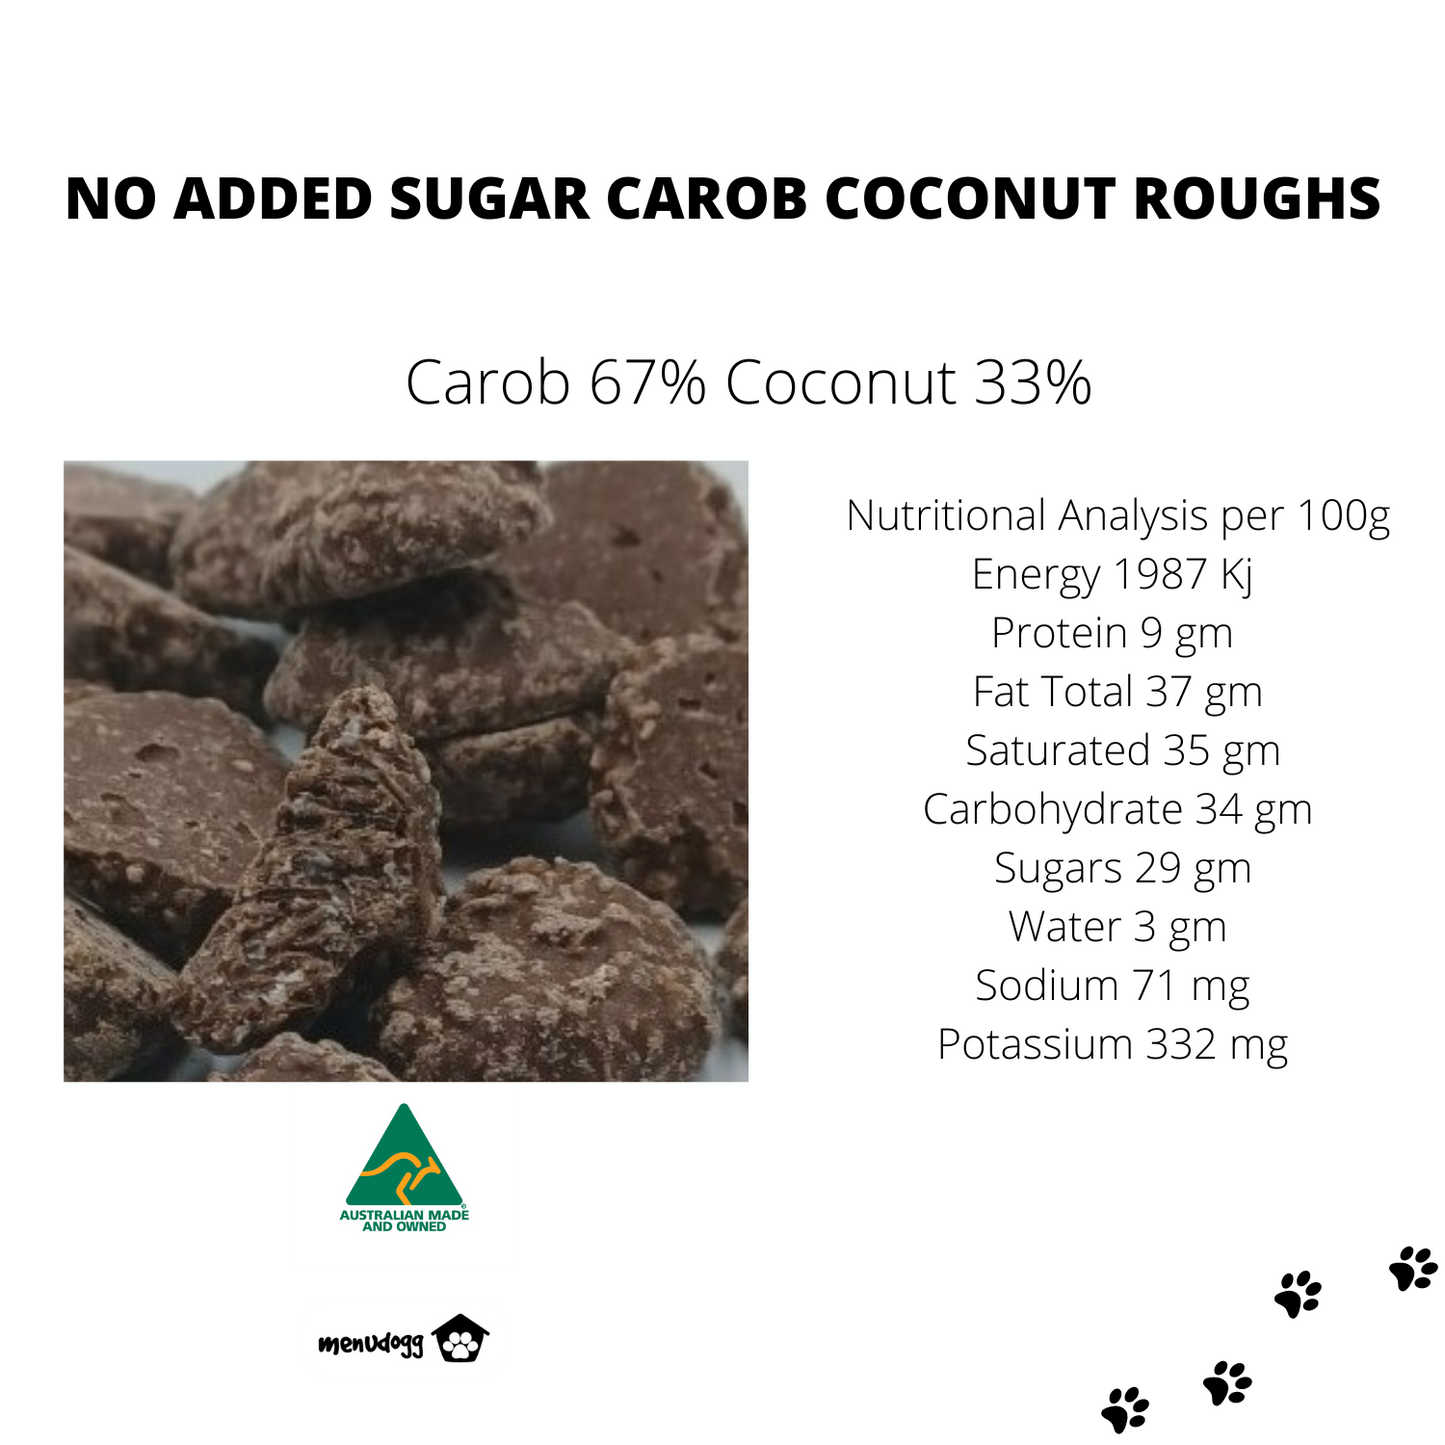 Carob and Coconut Roughs